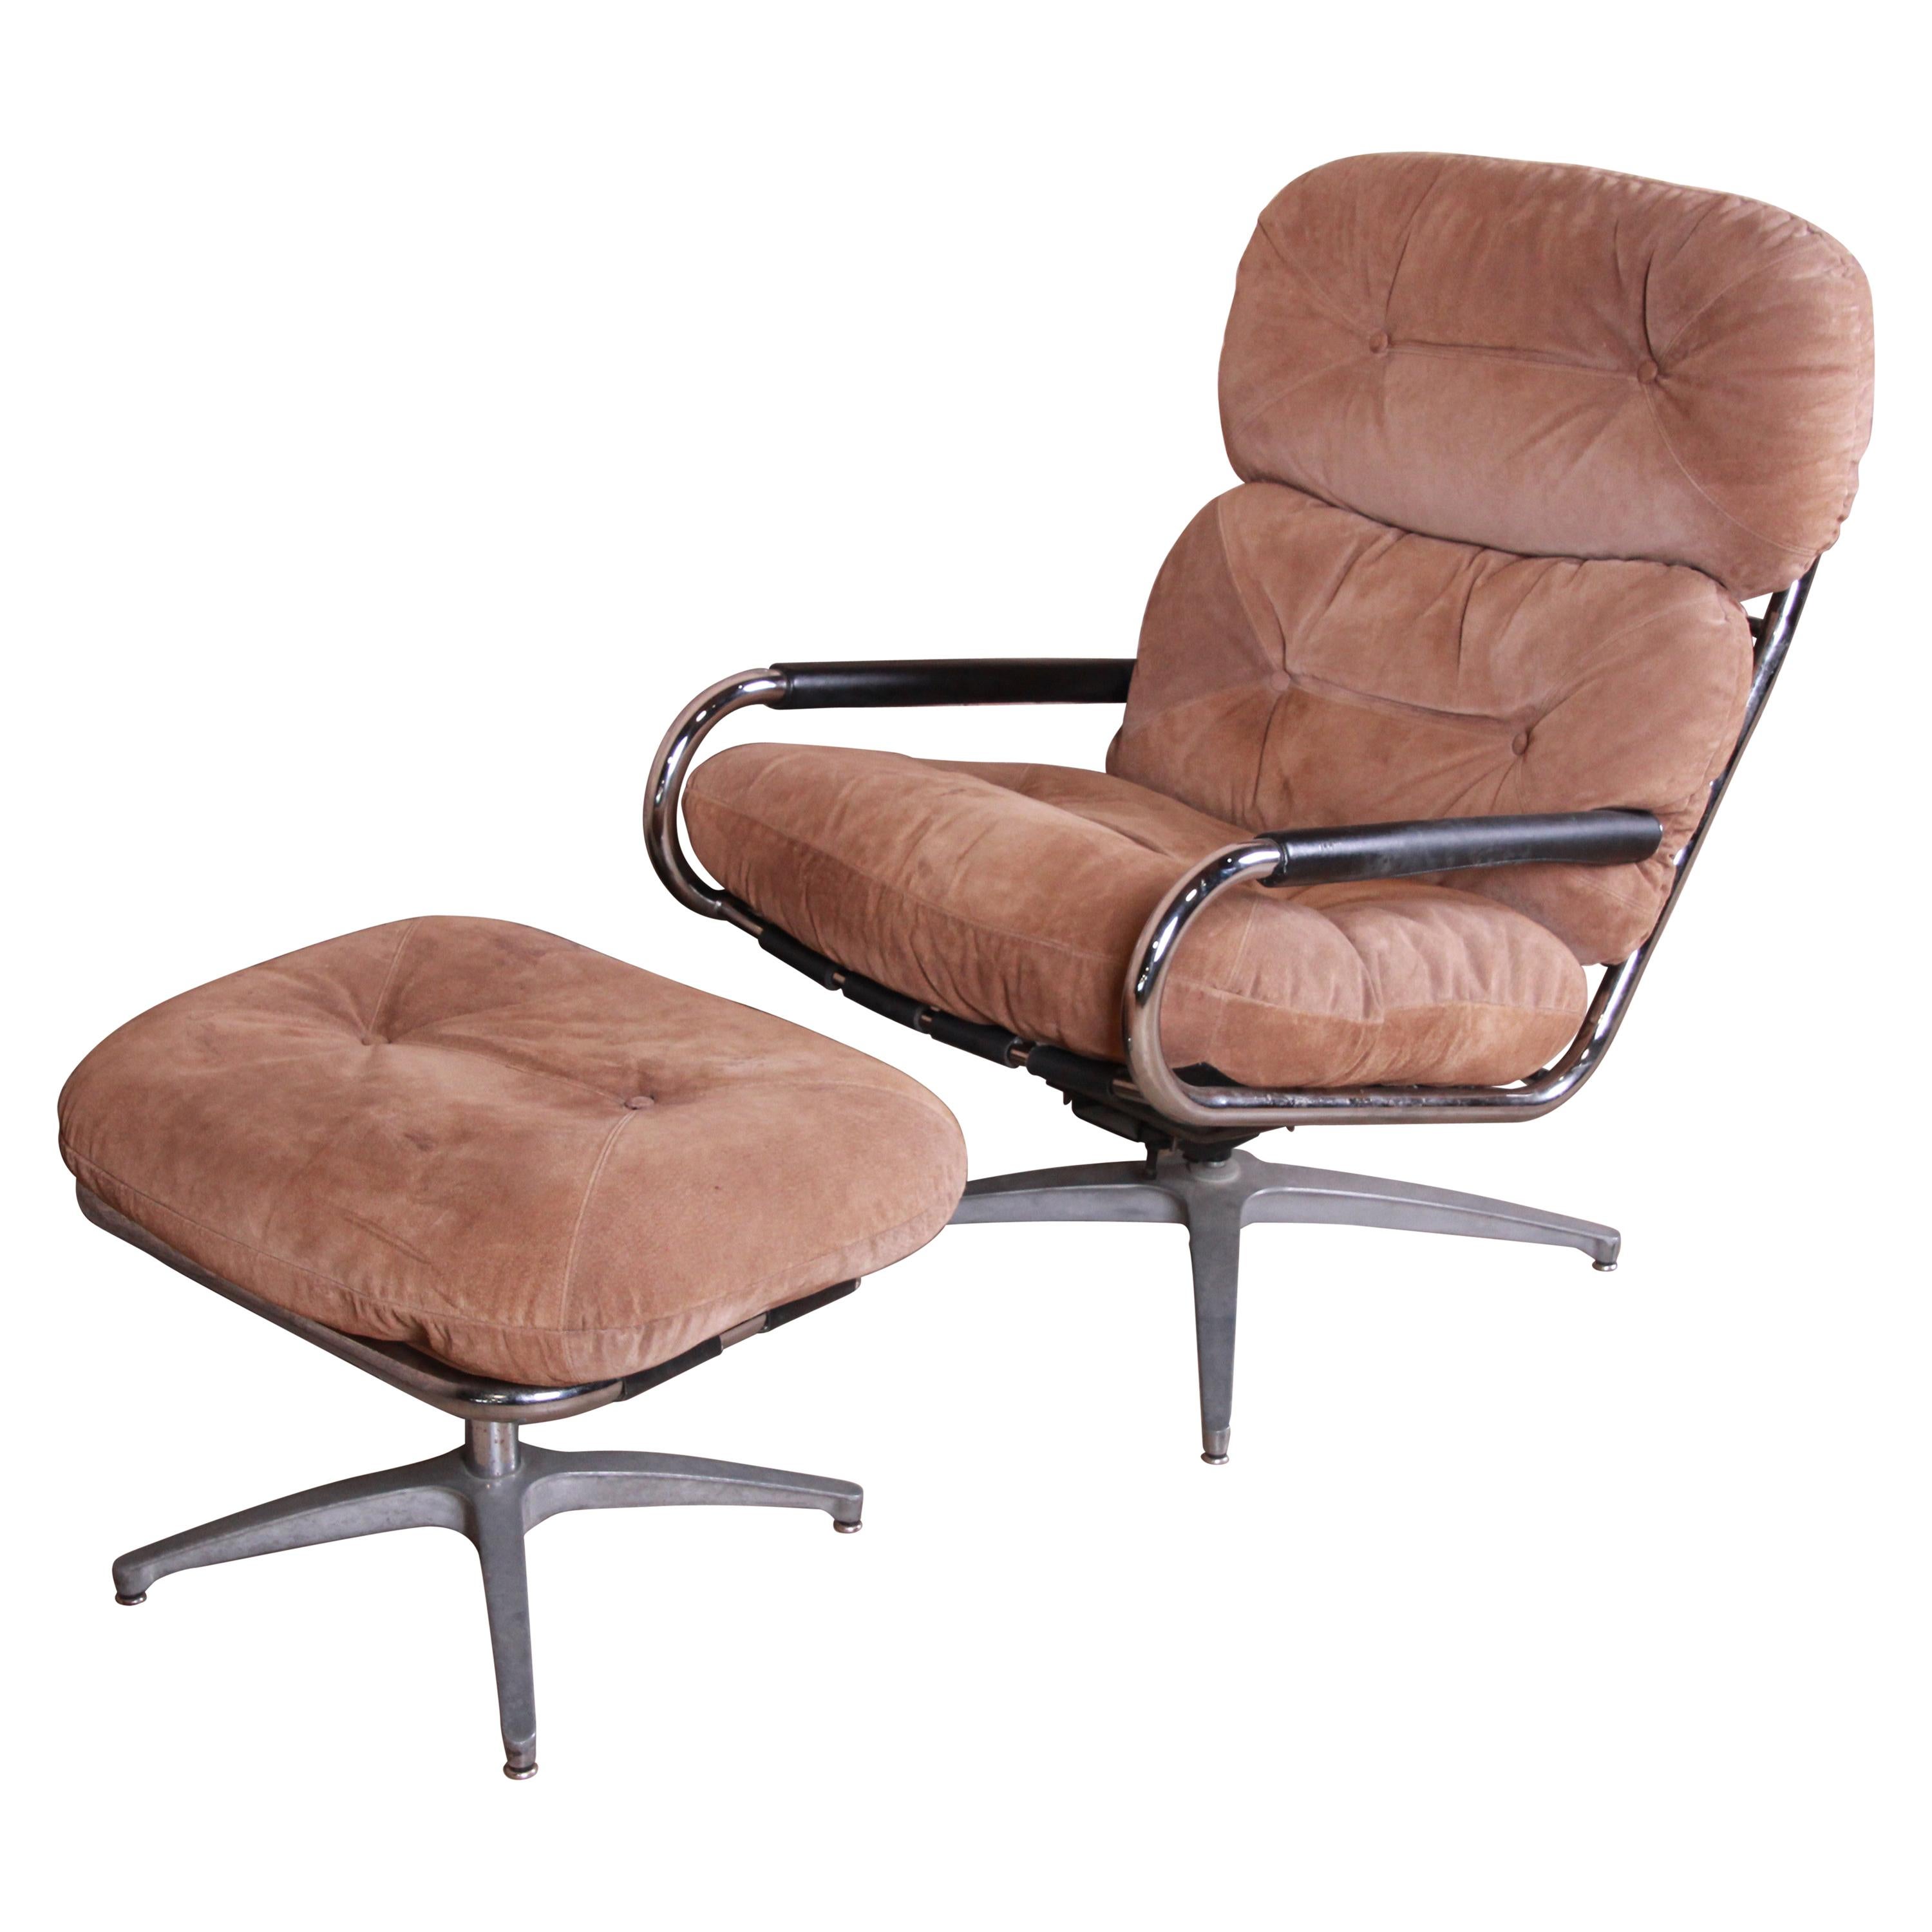 Directional Chrome and Suede Swivel Lounge Chair and Ottoman